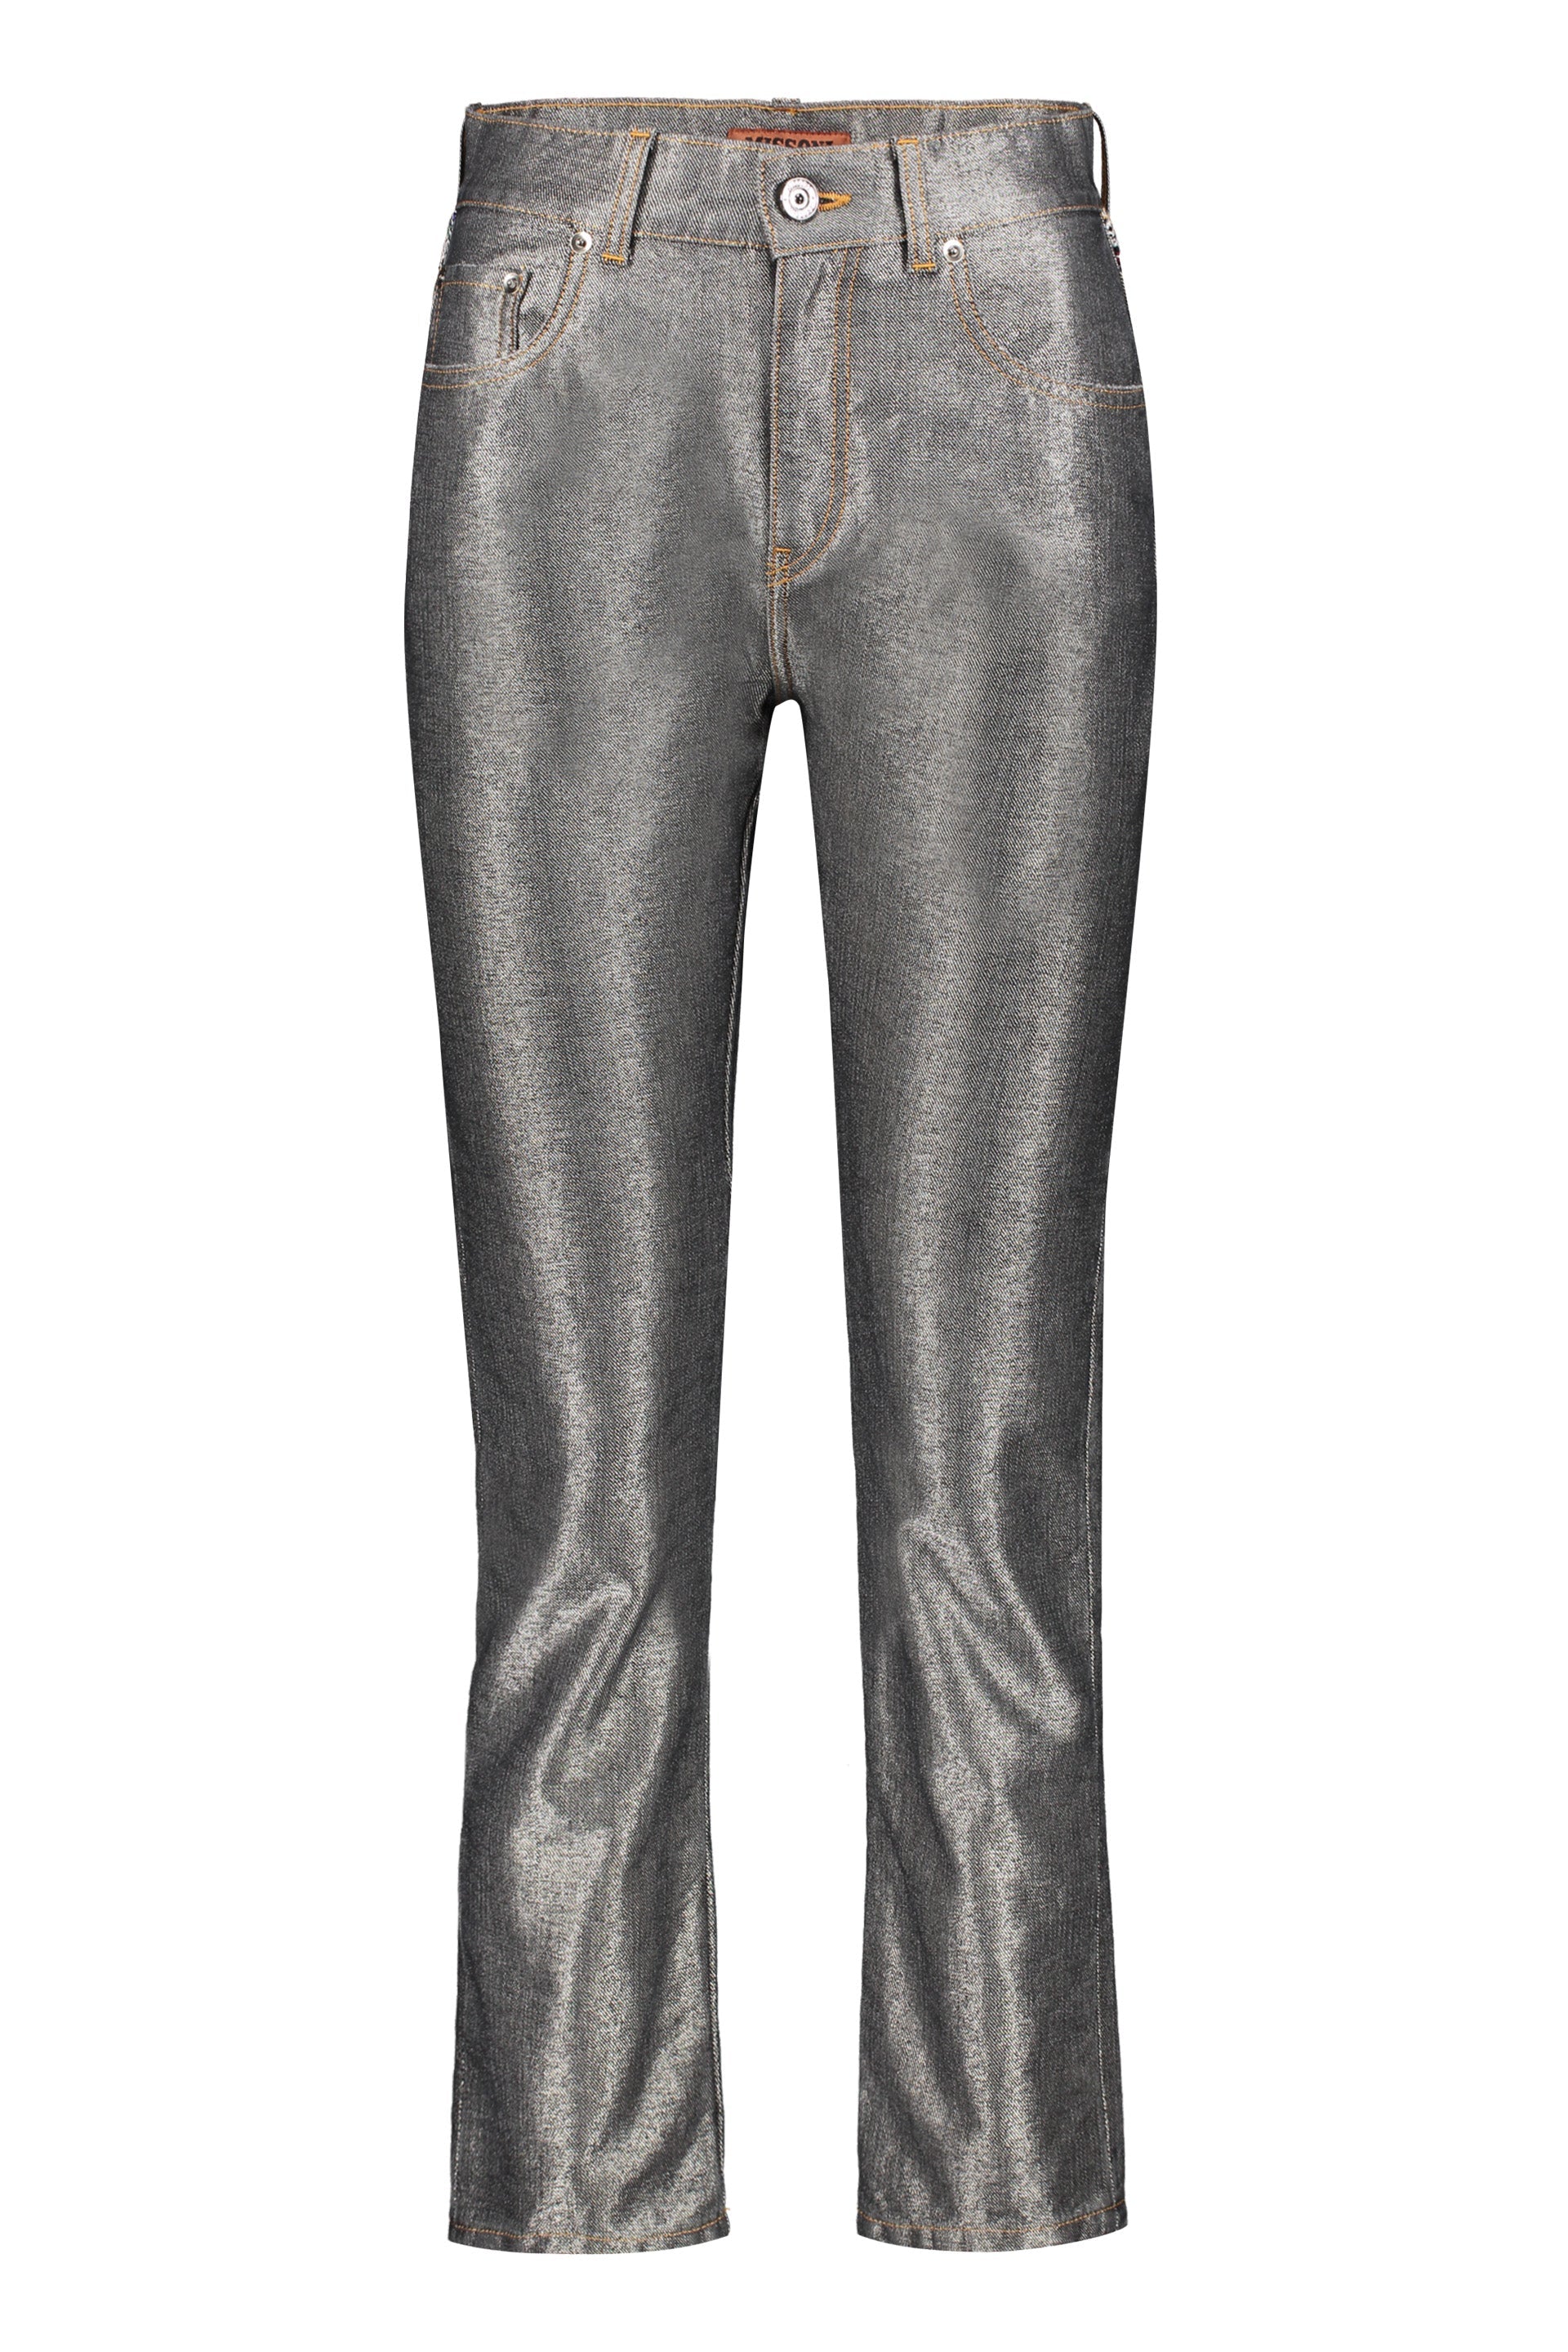 Missoni-OUTLET-SALE-Straight-leg-trousers-Hosen-38-ARCHIVE-COLLECTION.jpg